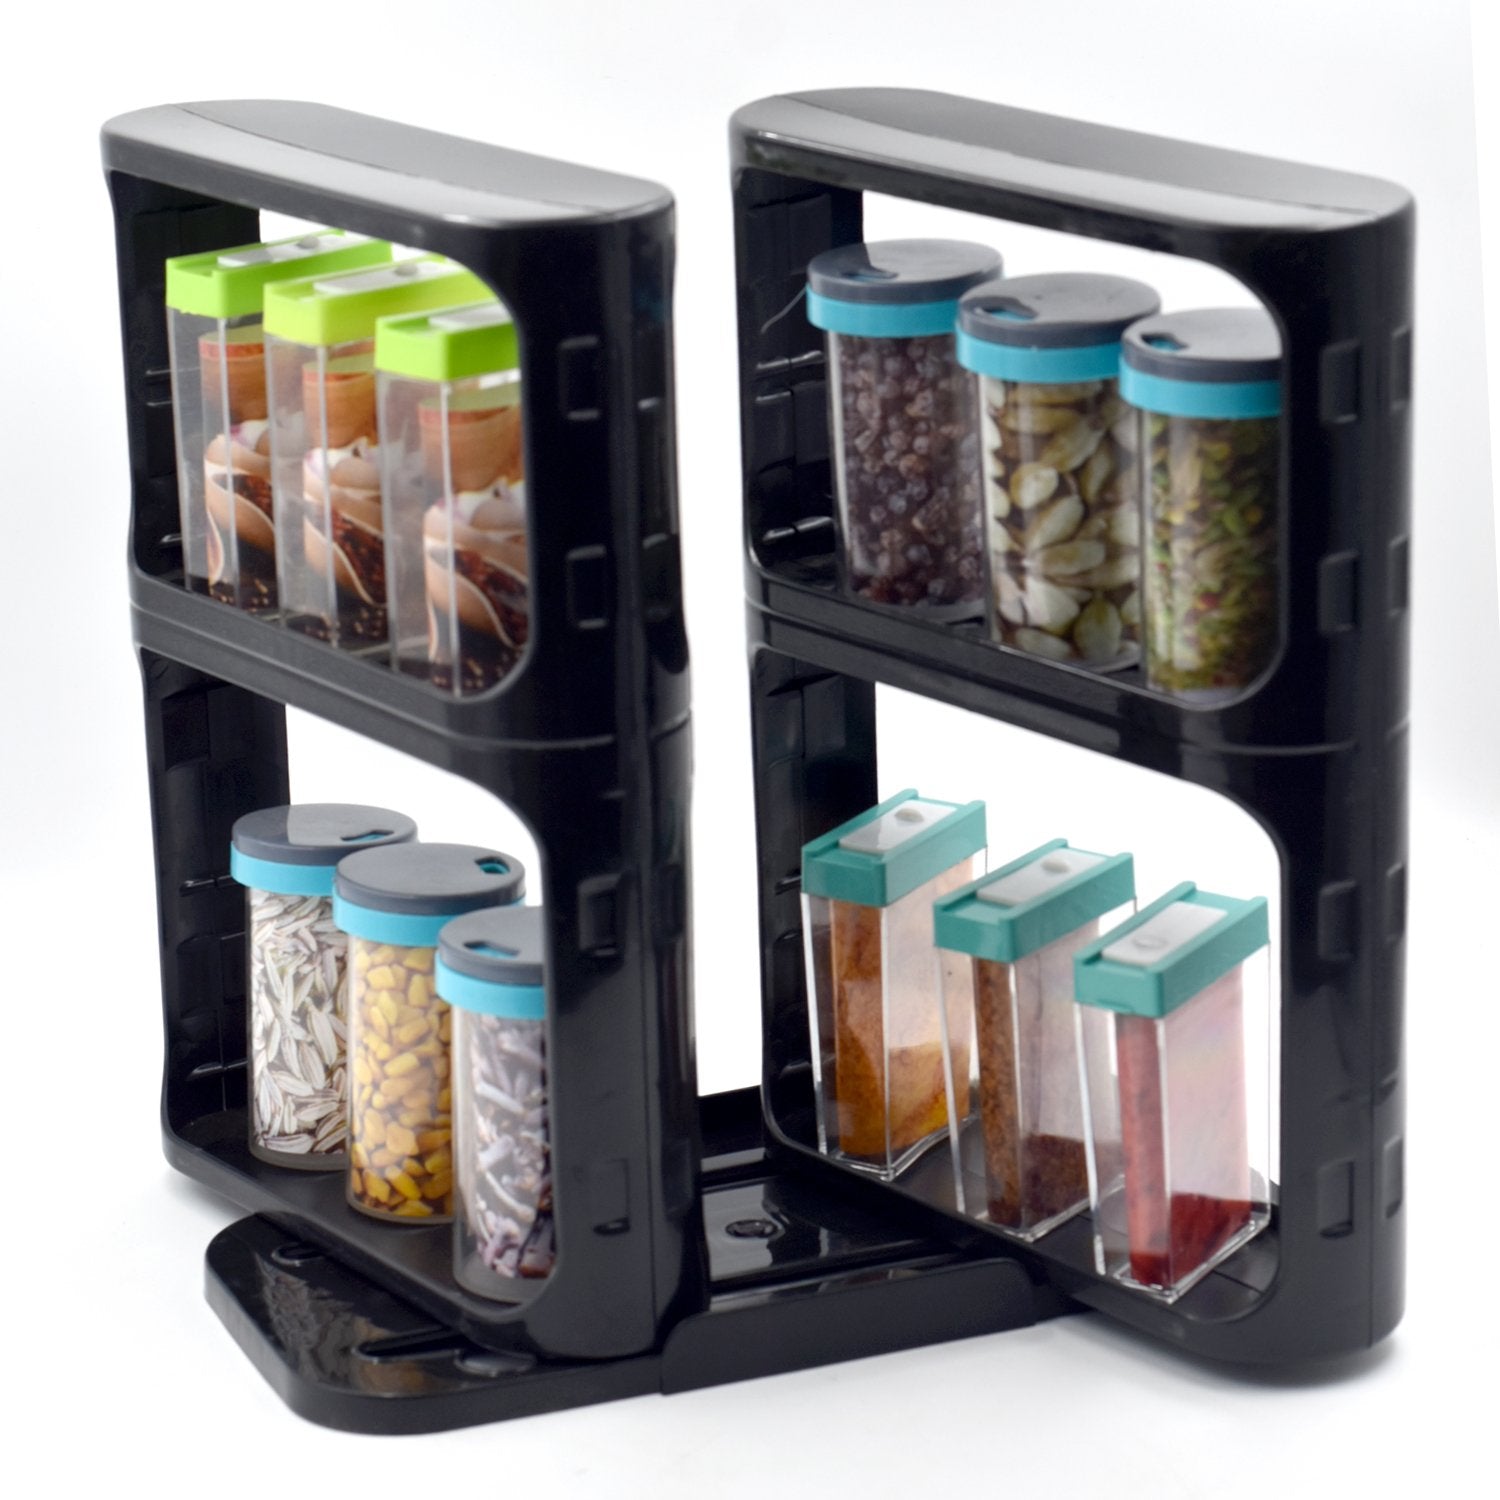 2621 Cabinet Caddy, Modular Rotating Spice Rack Multi-functional Organizer Rack Two 2-Tiered Shelves with Base